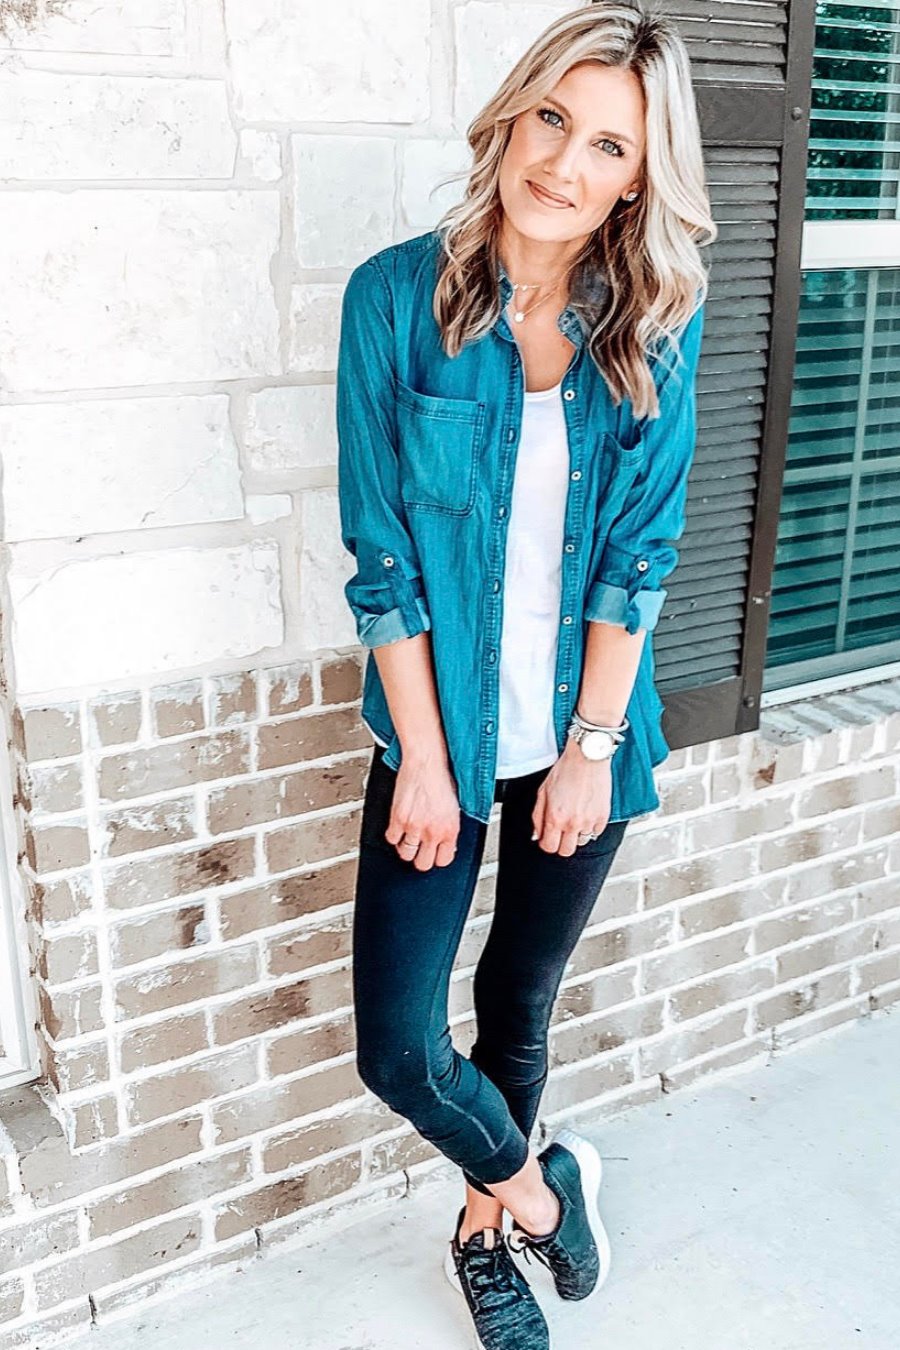 Chic Chambray Top